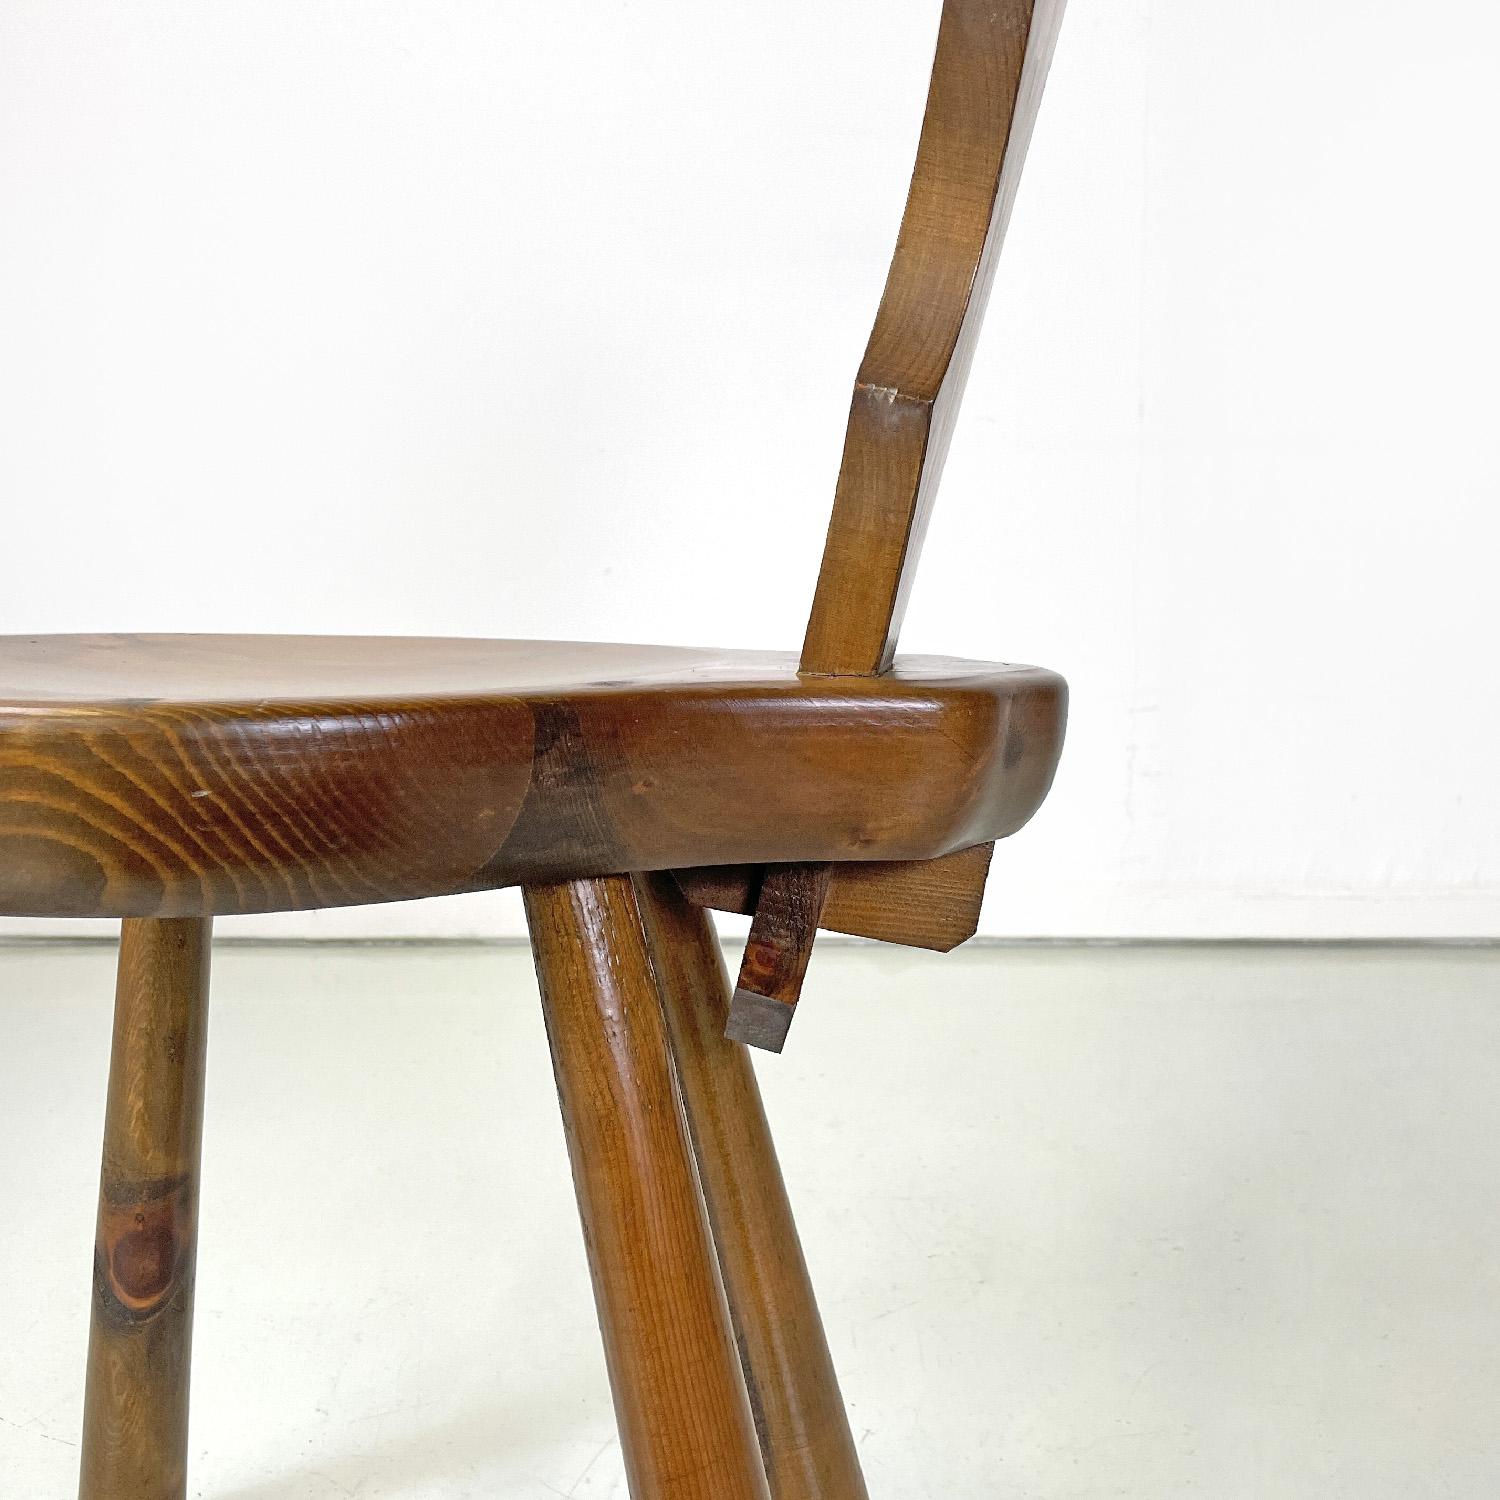 Italian Art Deco wooden chair with rounded profiles, 1940s For Sale 3